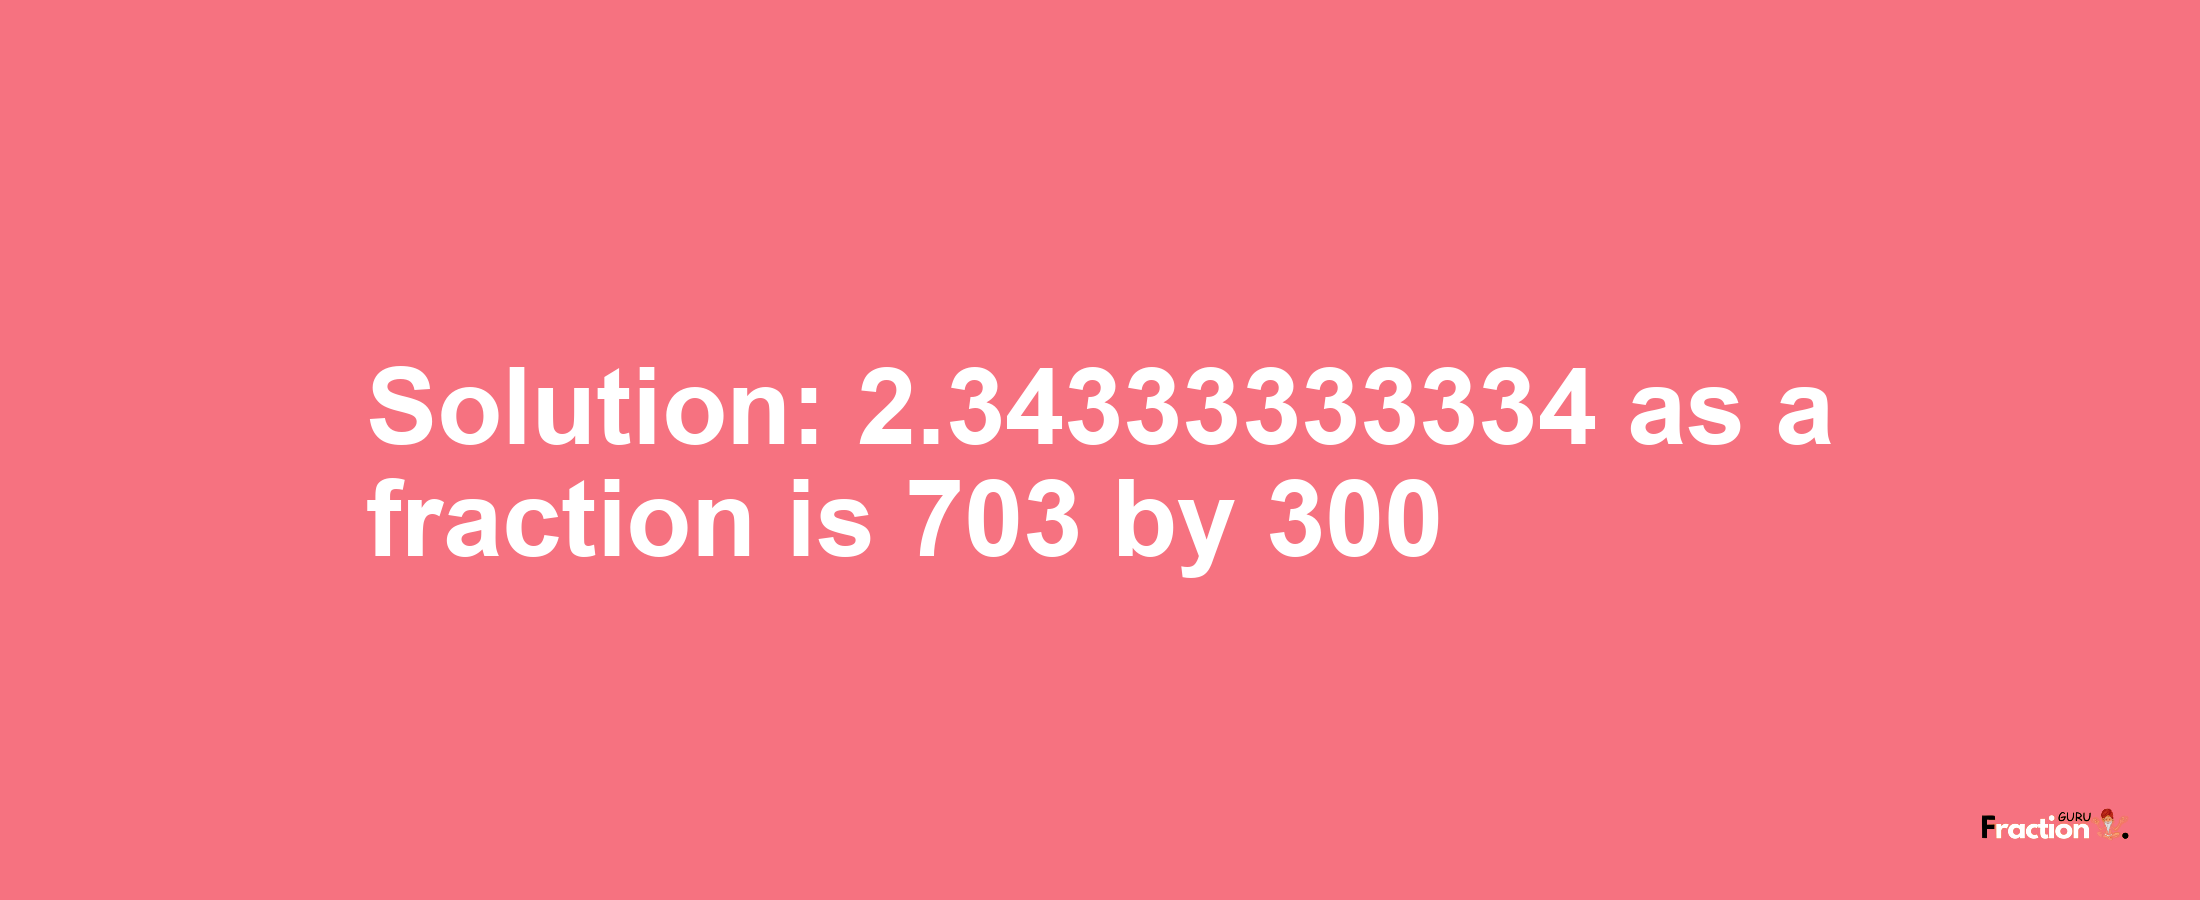 Solution:2.34333333334 as a fraction is 703/300